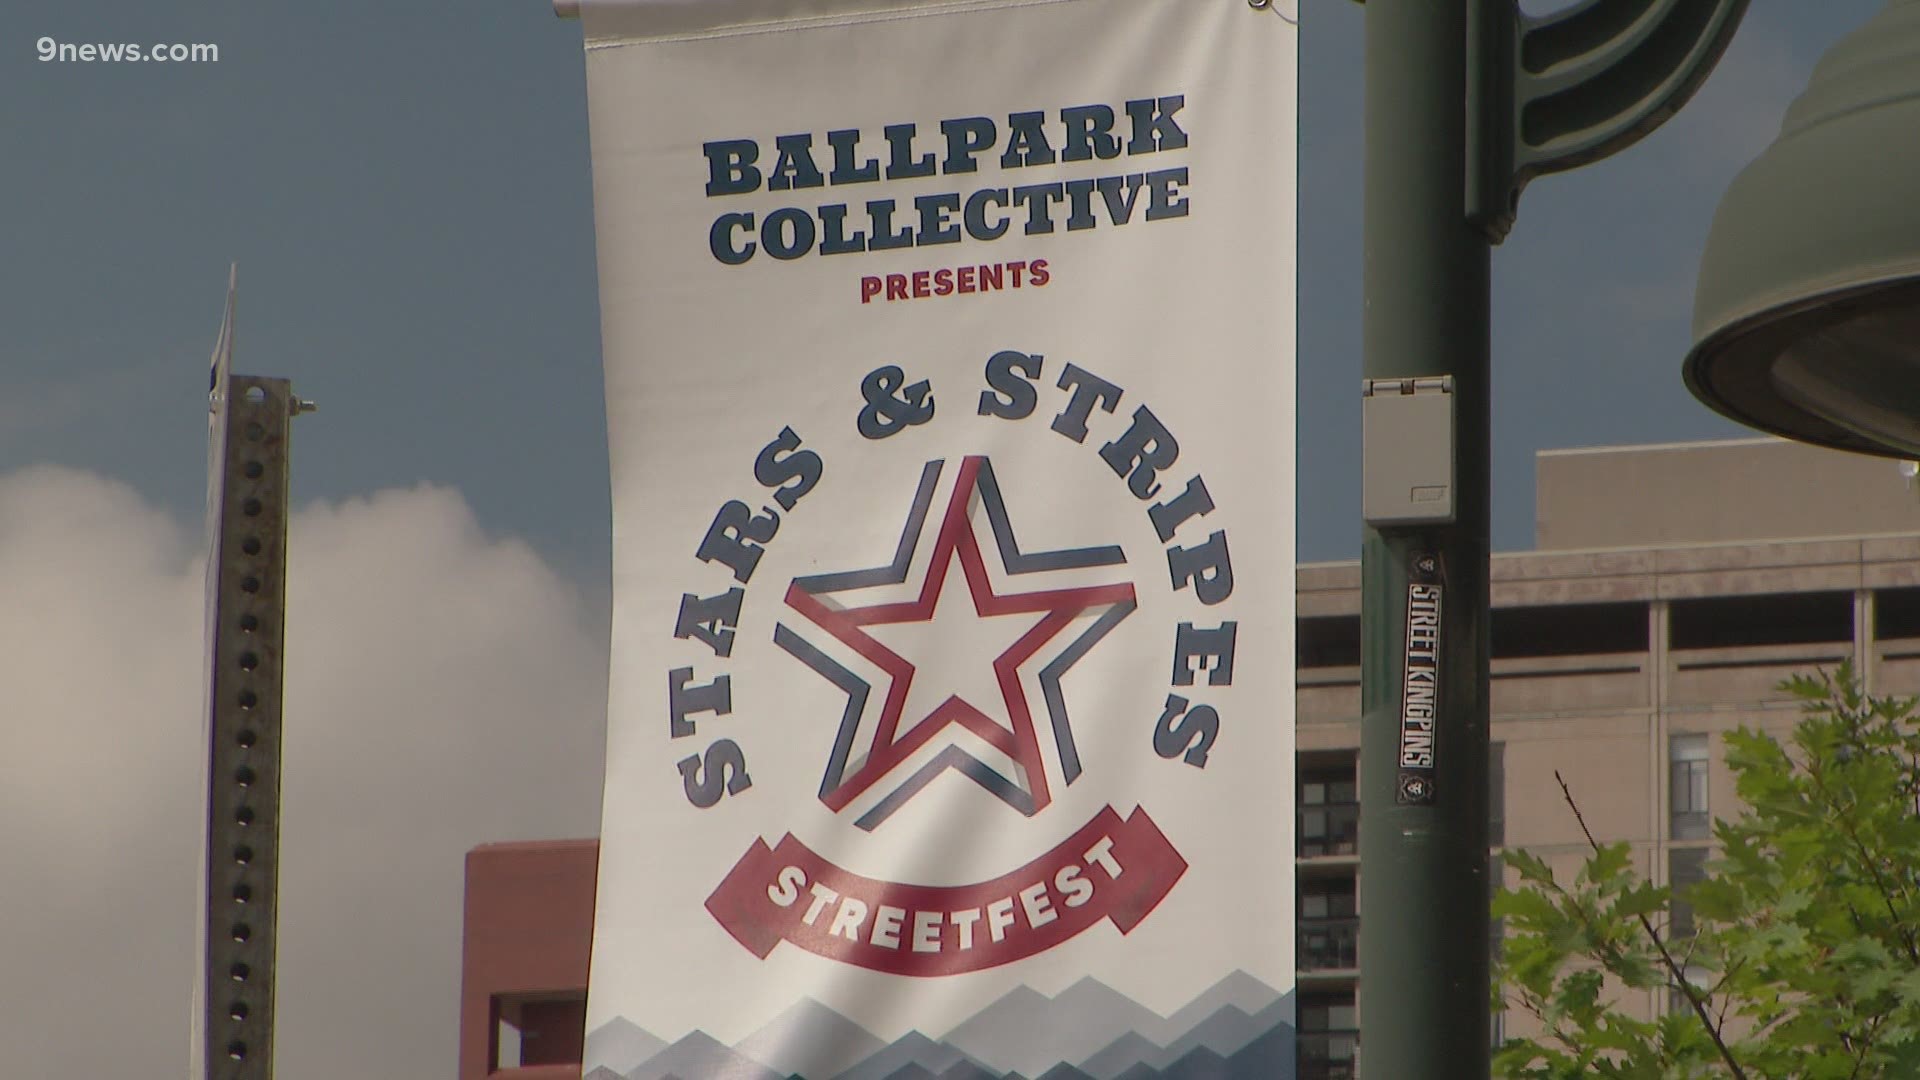 The Stars and Stripes Streetfest in downtown Denver will be open through July 13.